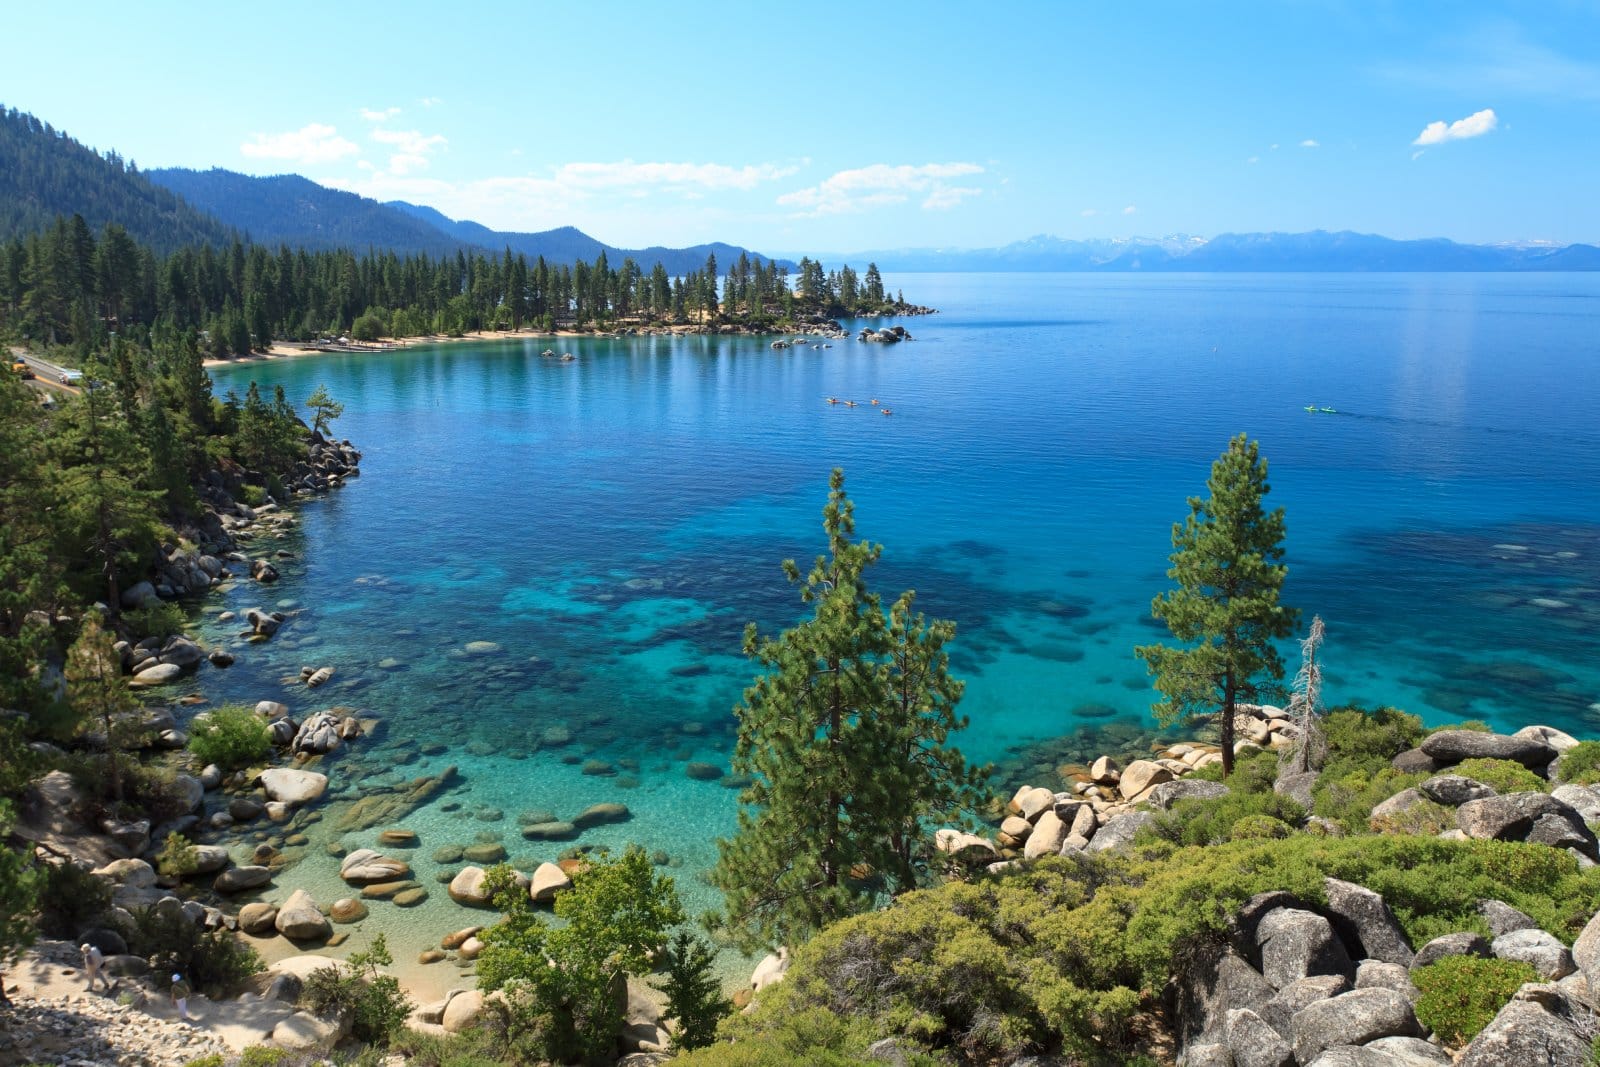 <p><span>Indulge in the stunning alpine scenery and outdoor adventures of Lake Tahoe, with its crystal-clear waters and snow-capped peaks that rival the landscapes of the Swiss Alps.</span></p>